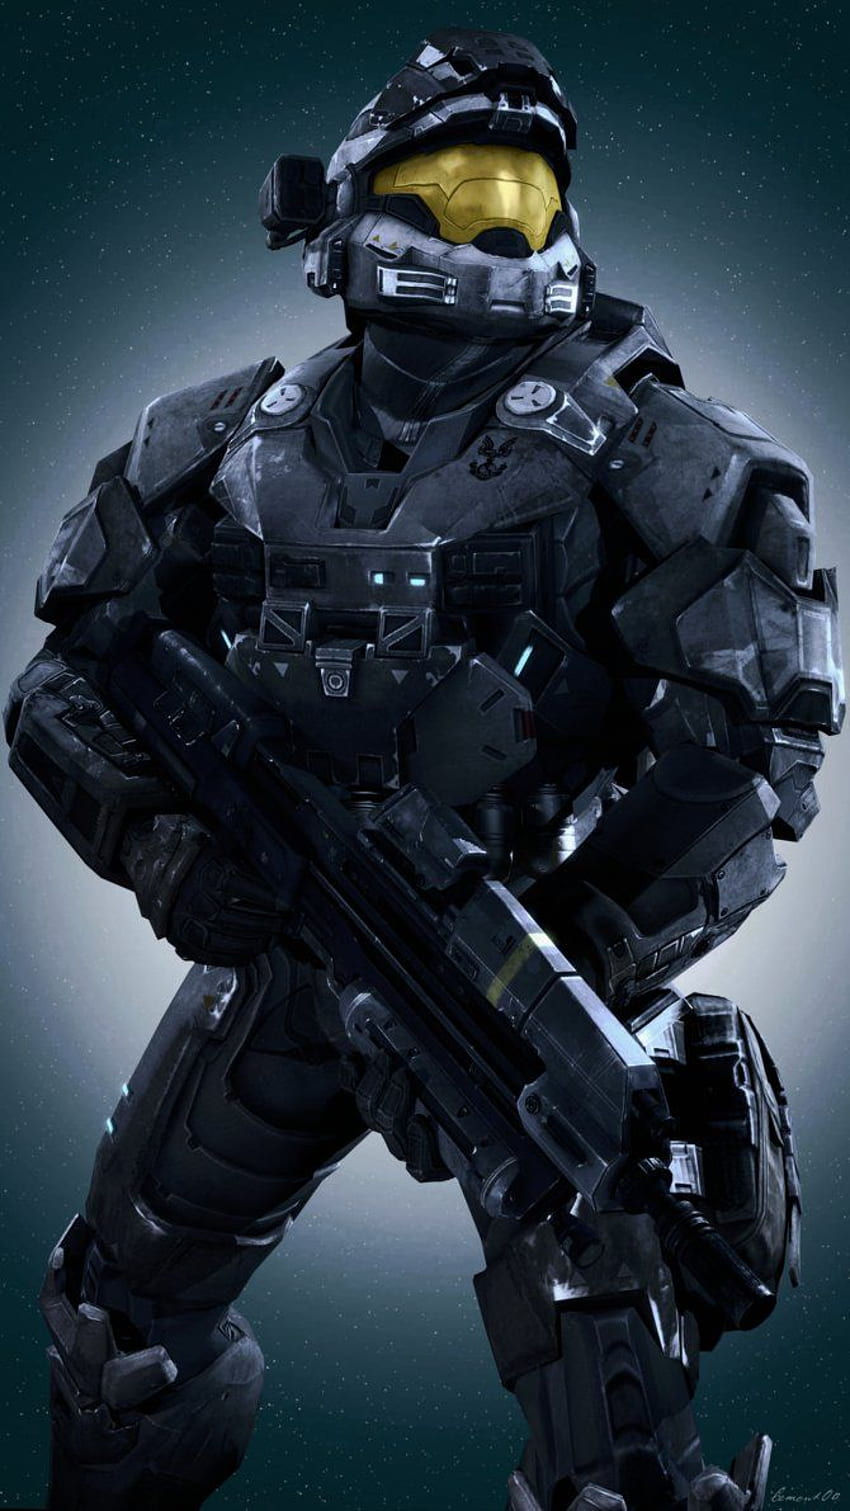 Halo Reach - Noble Six \ Multiplayer Spartans on. Halo reach, Halo armor, Halo spartan, Noble 6 HD phone wallpaper